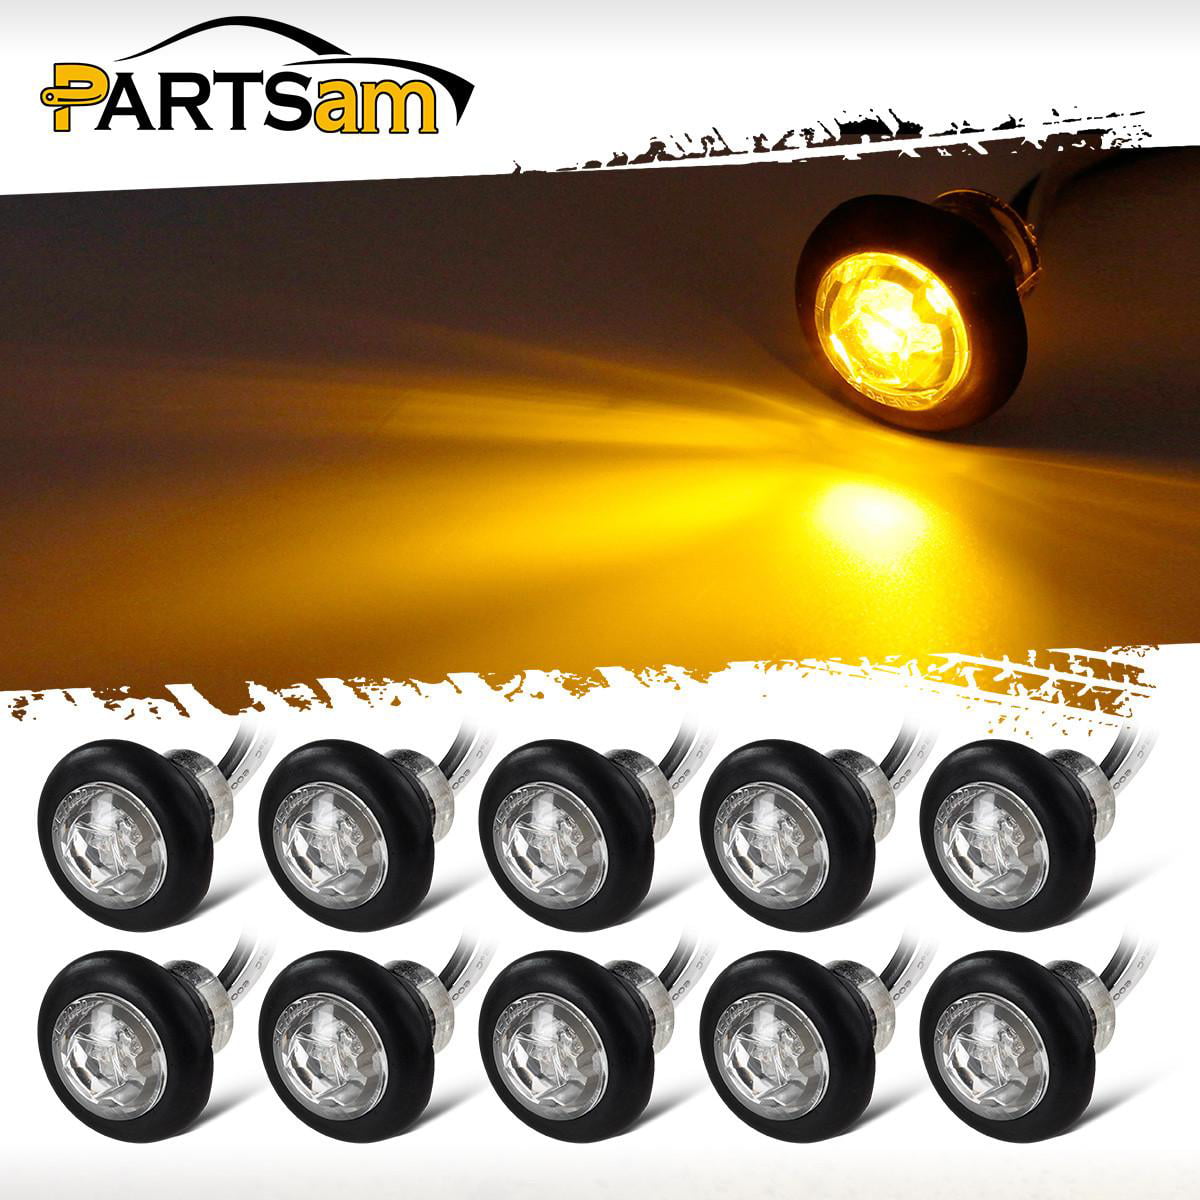 FIVE 3/4" Amber Clear LED Clearance Side Marker Bullet Trailer Light Truck PC 